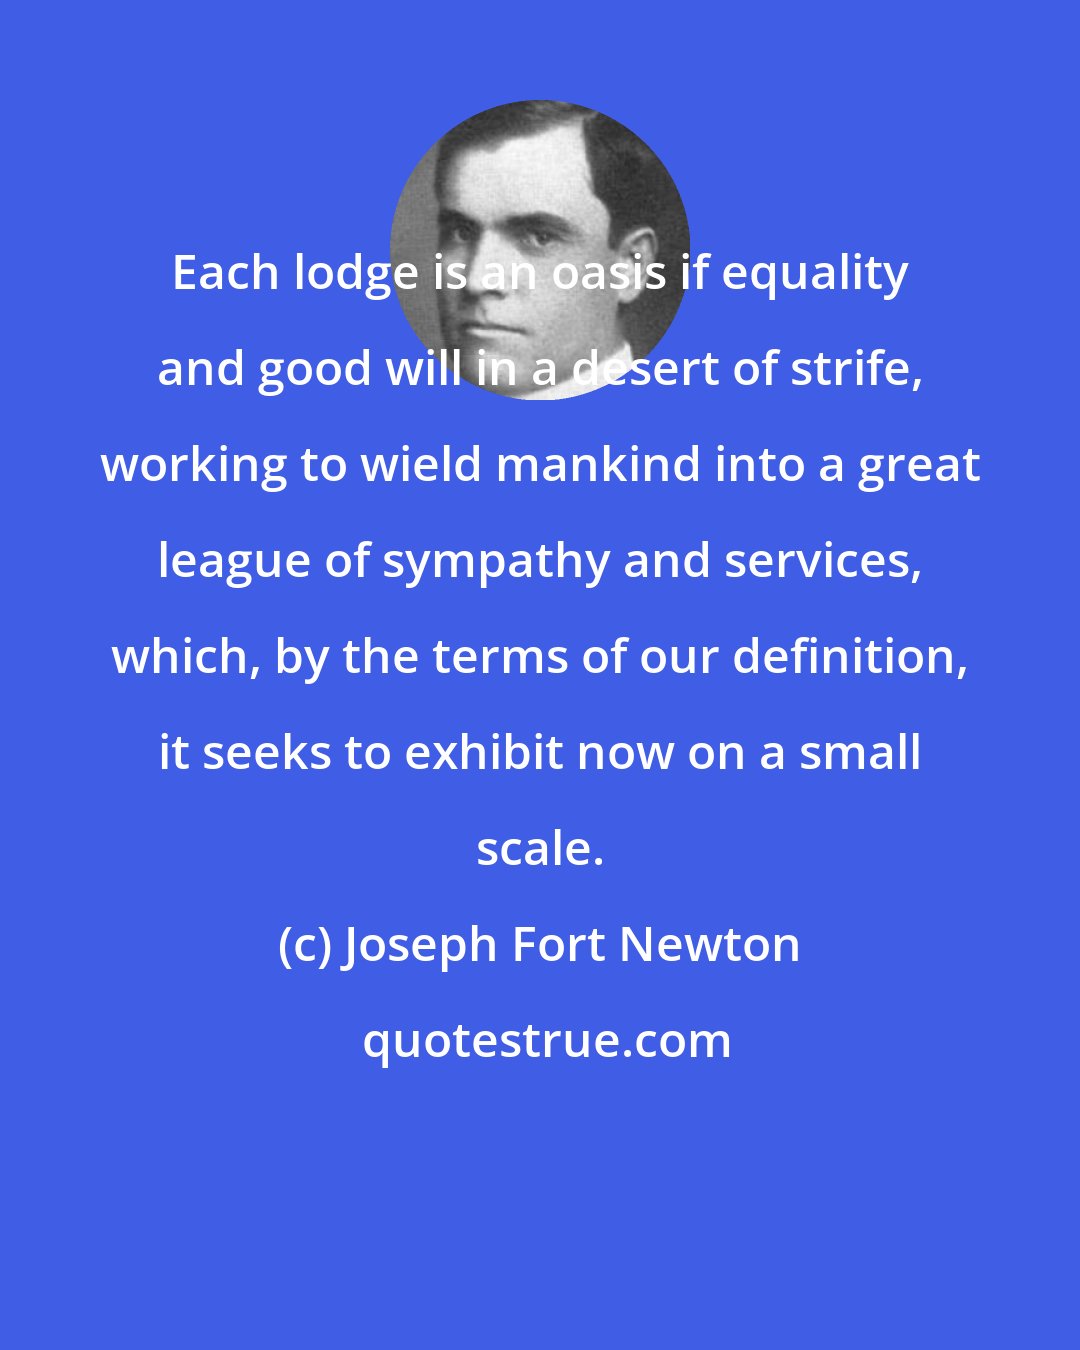 Joseph Fort Newton: Each lodge is an oasis if equality and good will in a desert of strife, working to wield mankind into a great league of sympathy and services, which, by the terms of our definition, it seeks to exhibit now on a small scale.